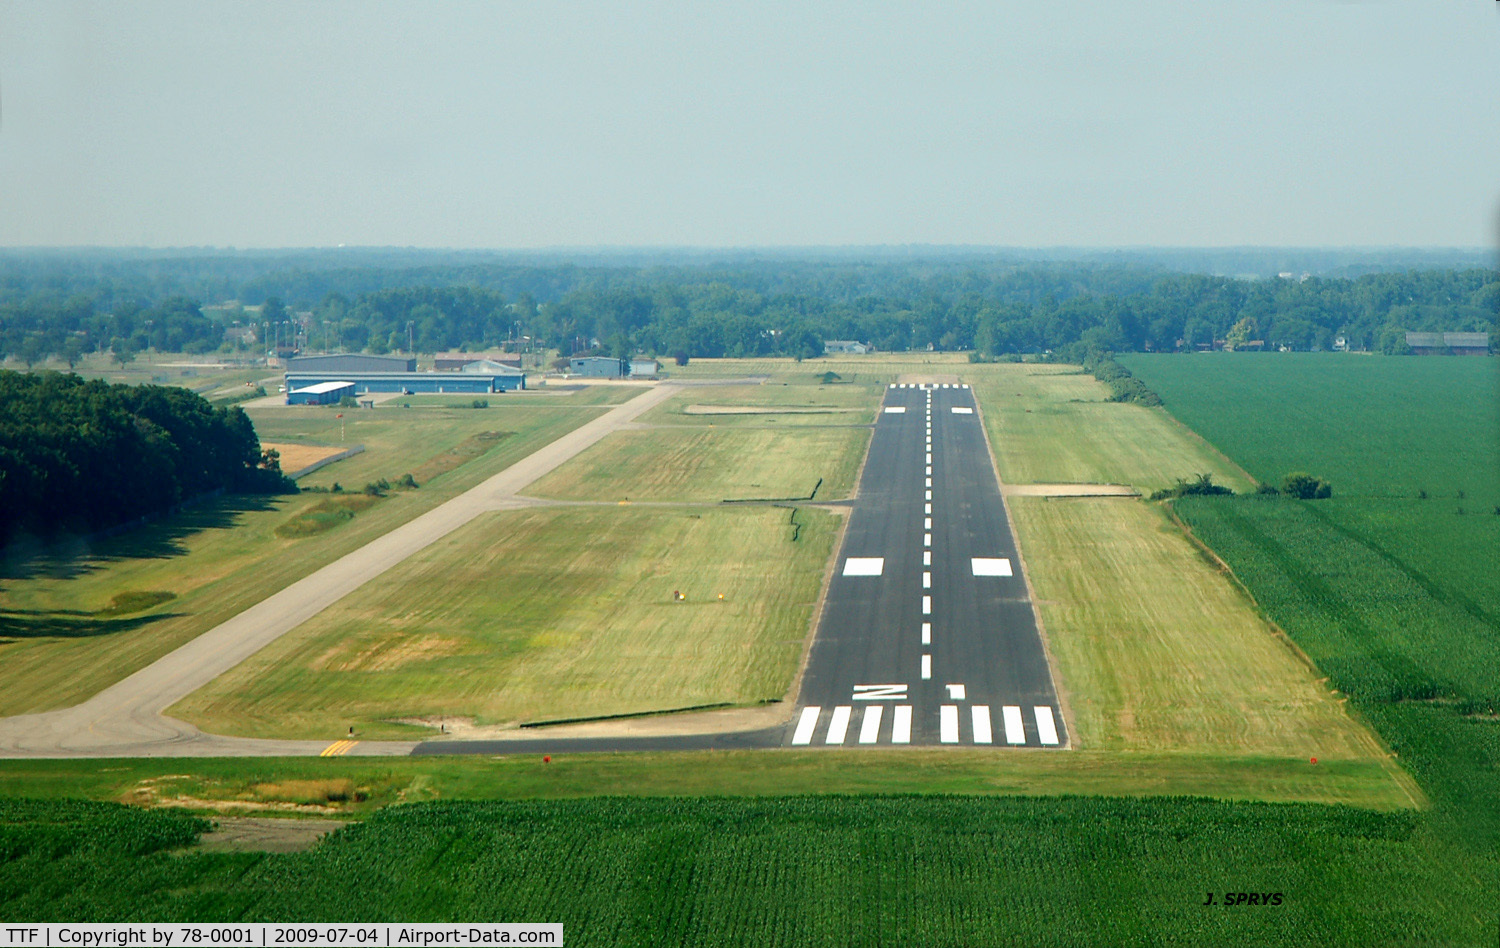 Custer Airport (TTF) - FRESHLY REPAVED 2010, SMOOTH... EXCELLENT JOB TO THE CREW.